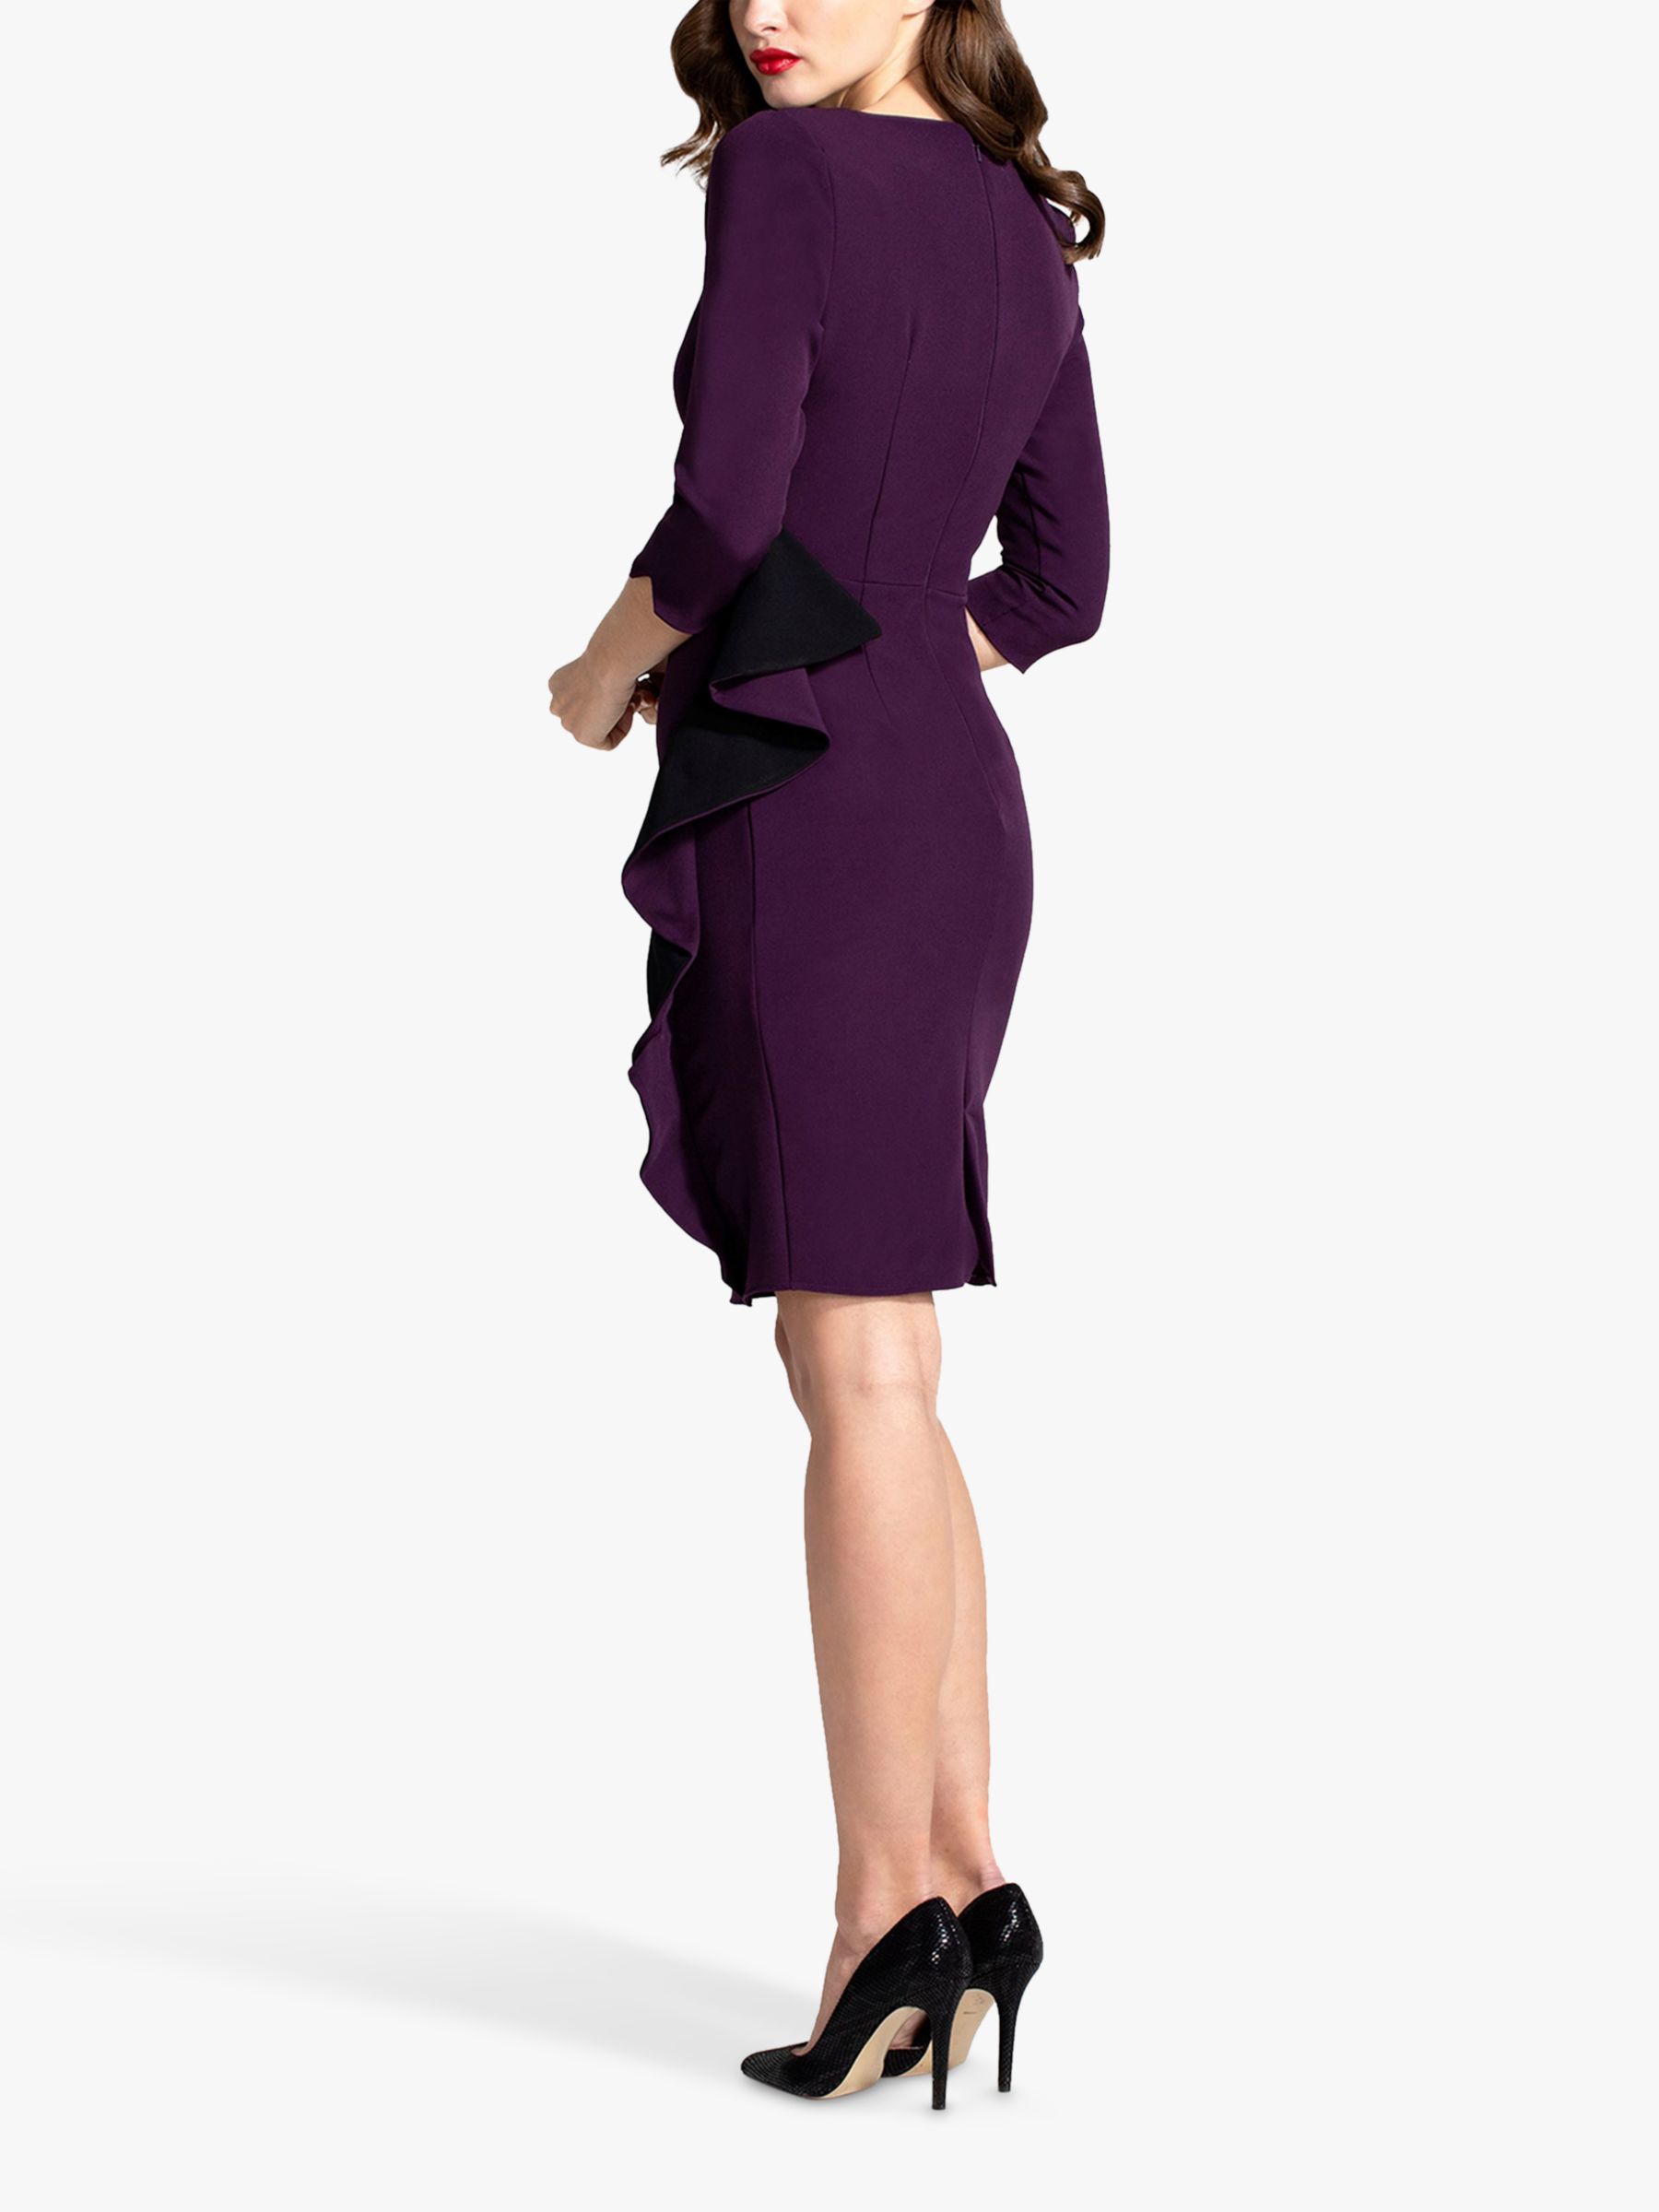 Buy HotSquash Frill Detail Bodycon Dress Online at johnlewis.com